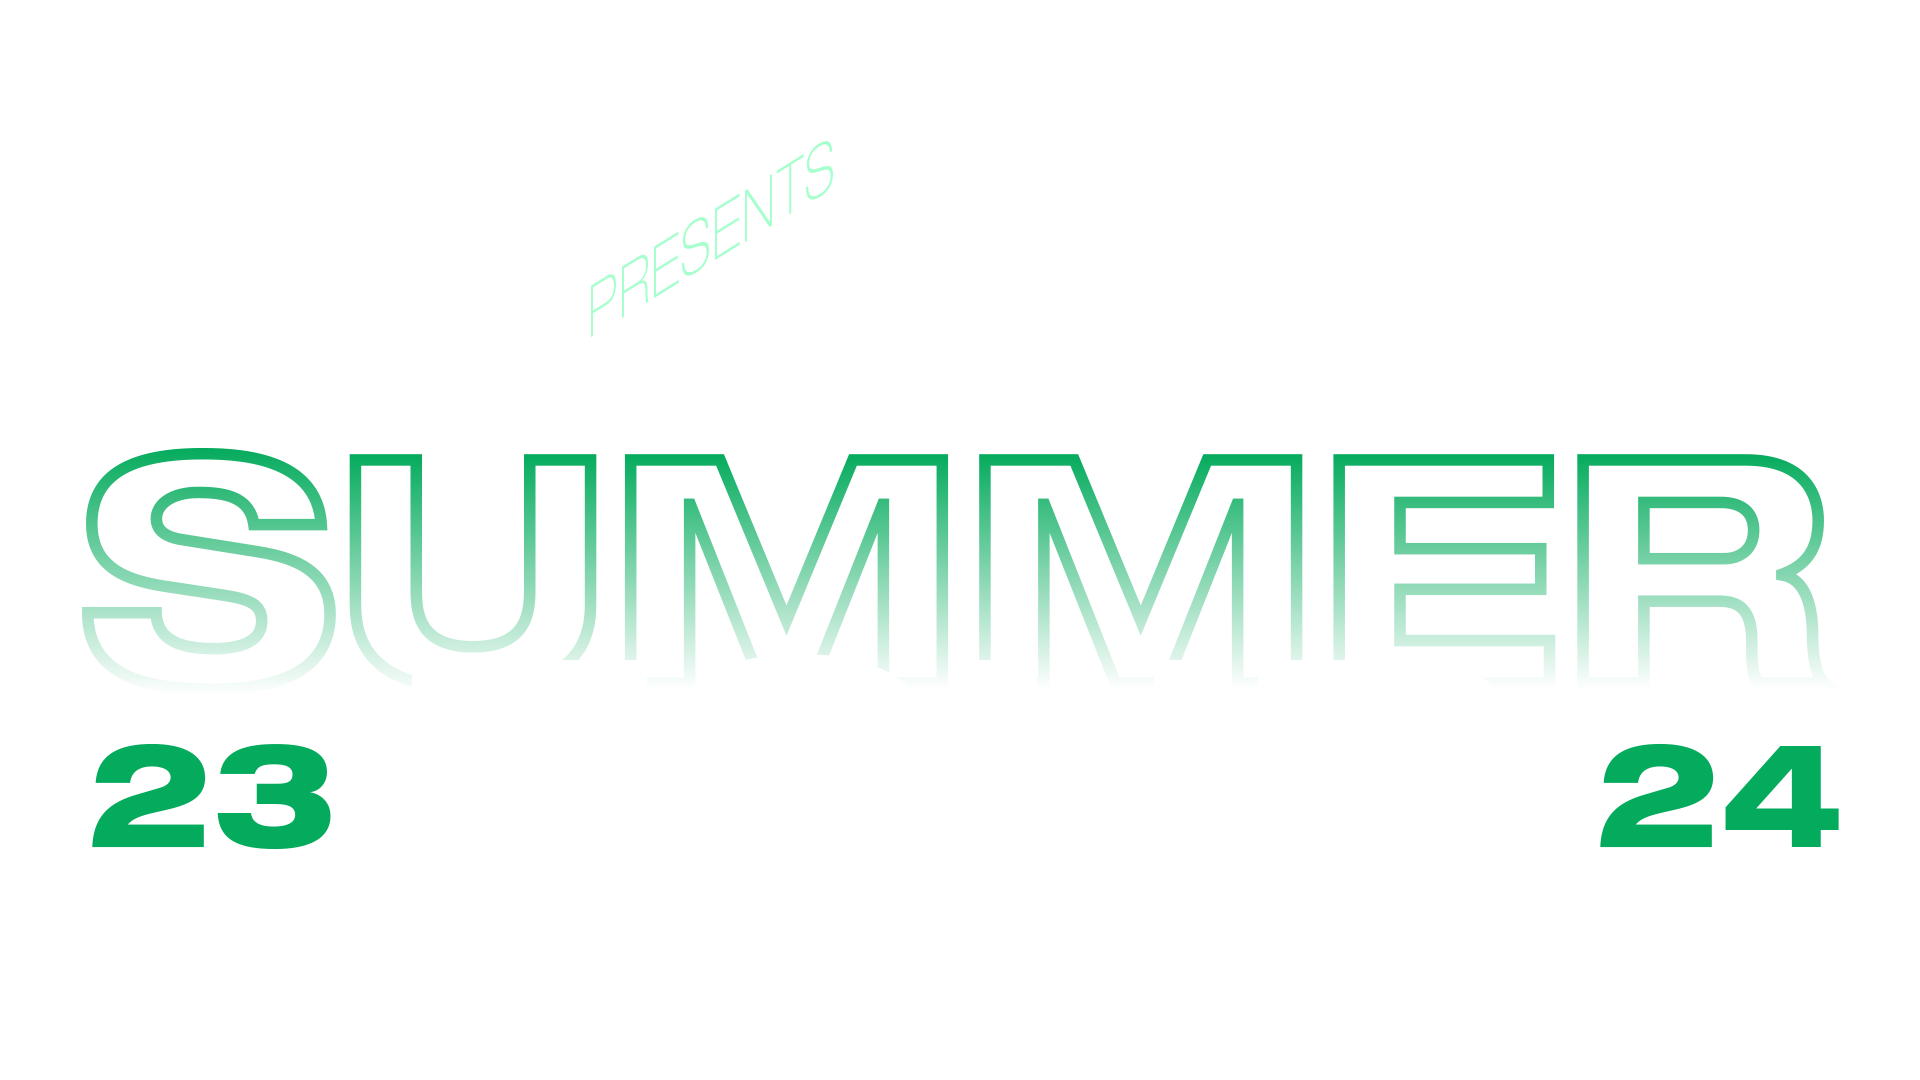 Odd Company Presents: George FM Summer Tour QUEENSTOWN